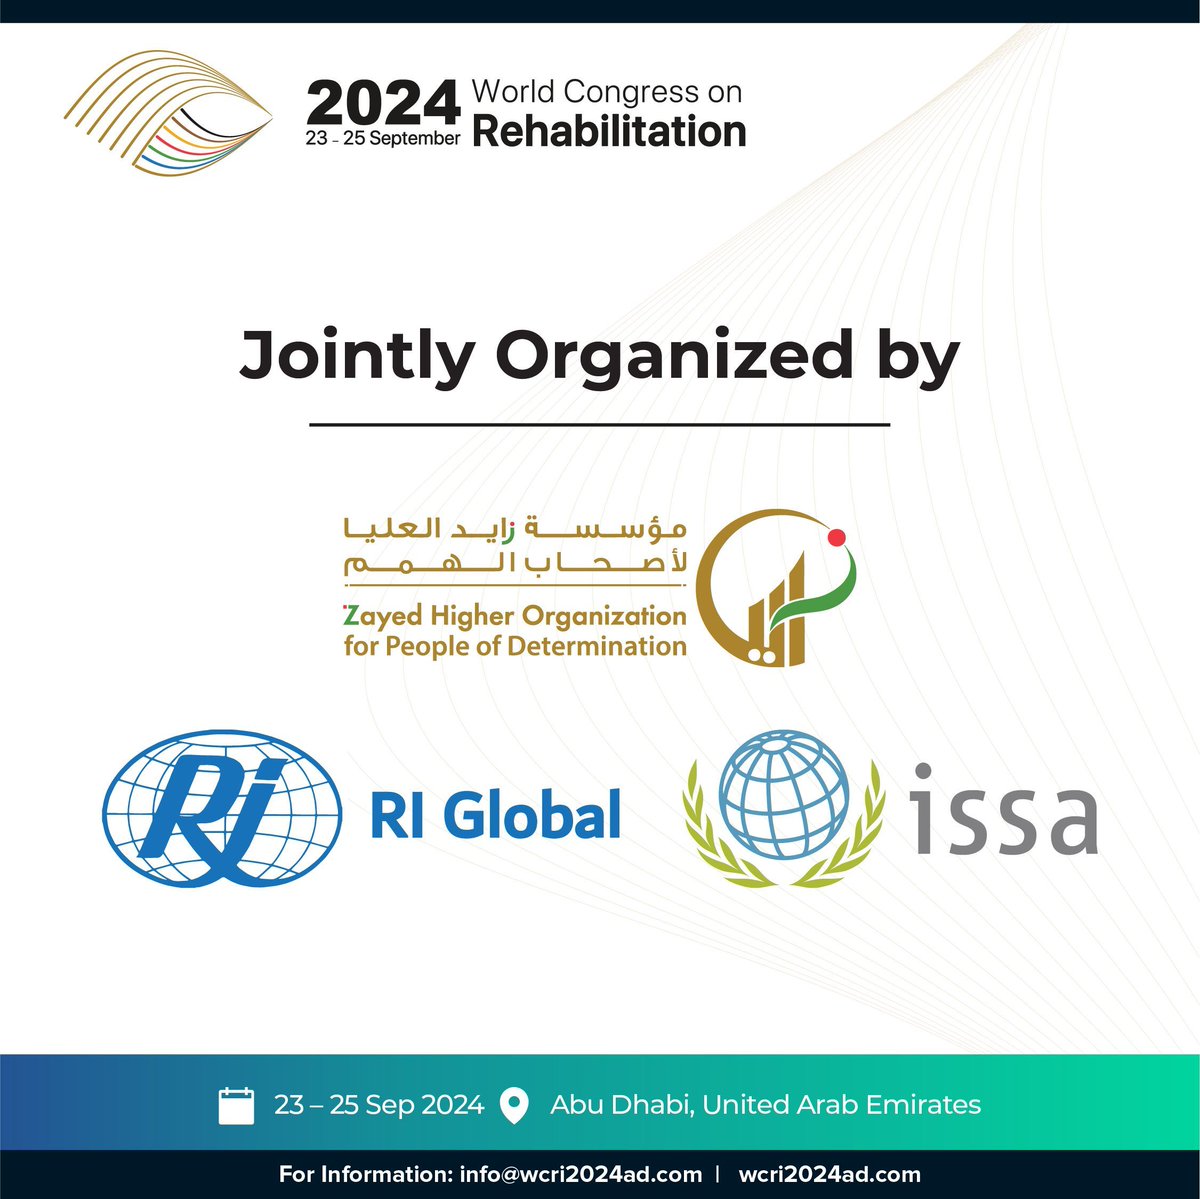 Proudly co-organized by Zayed Higher Organization for People of Determination, ISSA, and RI Global, the World Congress on Rehabilitation 2024 is set to ignite new frontiers in the field! 🌍✨ 

#WRC2024  #Abudhabi  #EmbracingInclusion #Rehabilitation2024 #InclusiveSocieties